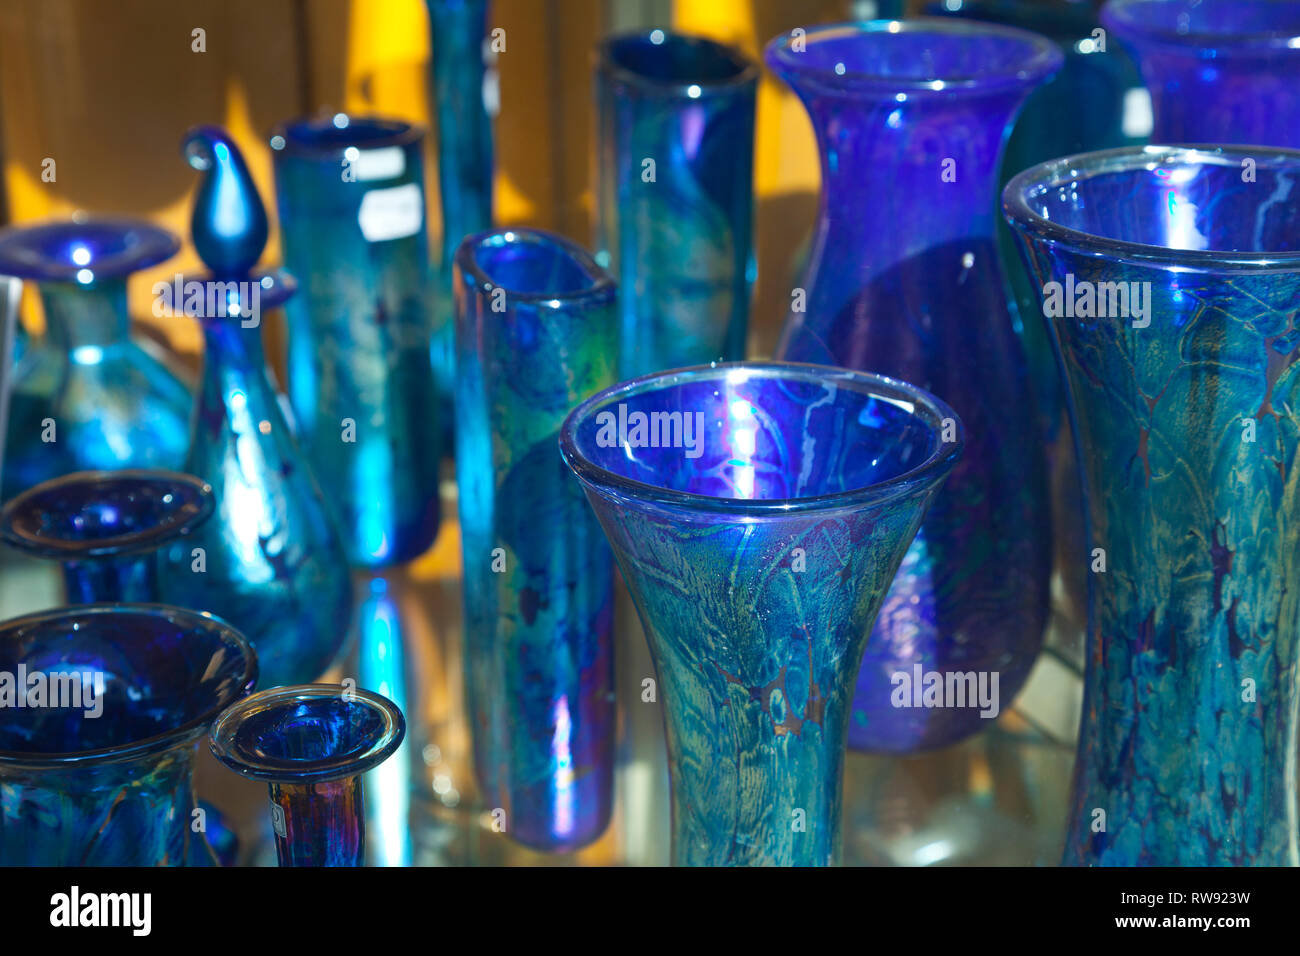 Page 2 - Malta Glass High Resolution Stock Photography and Images - Alamy